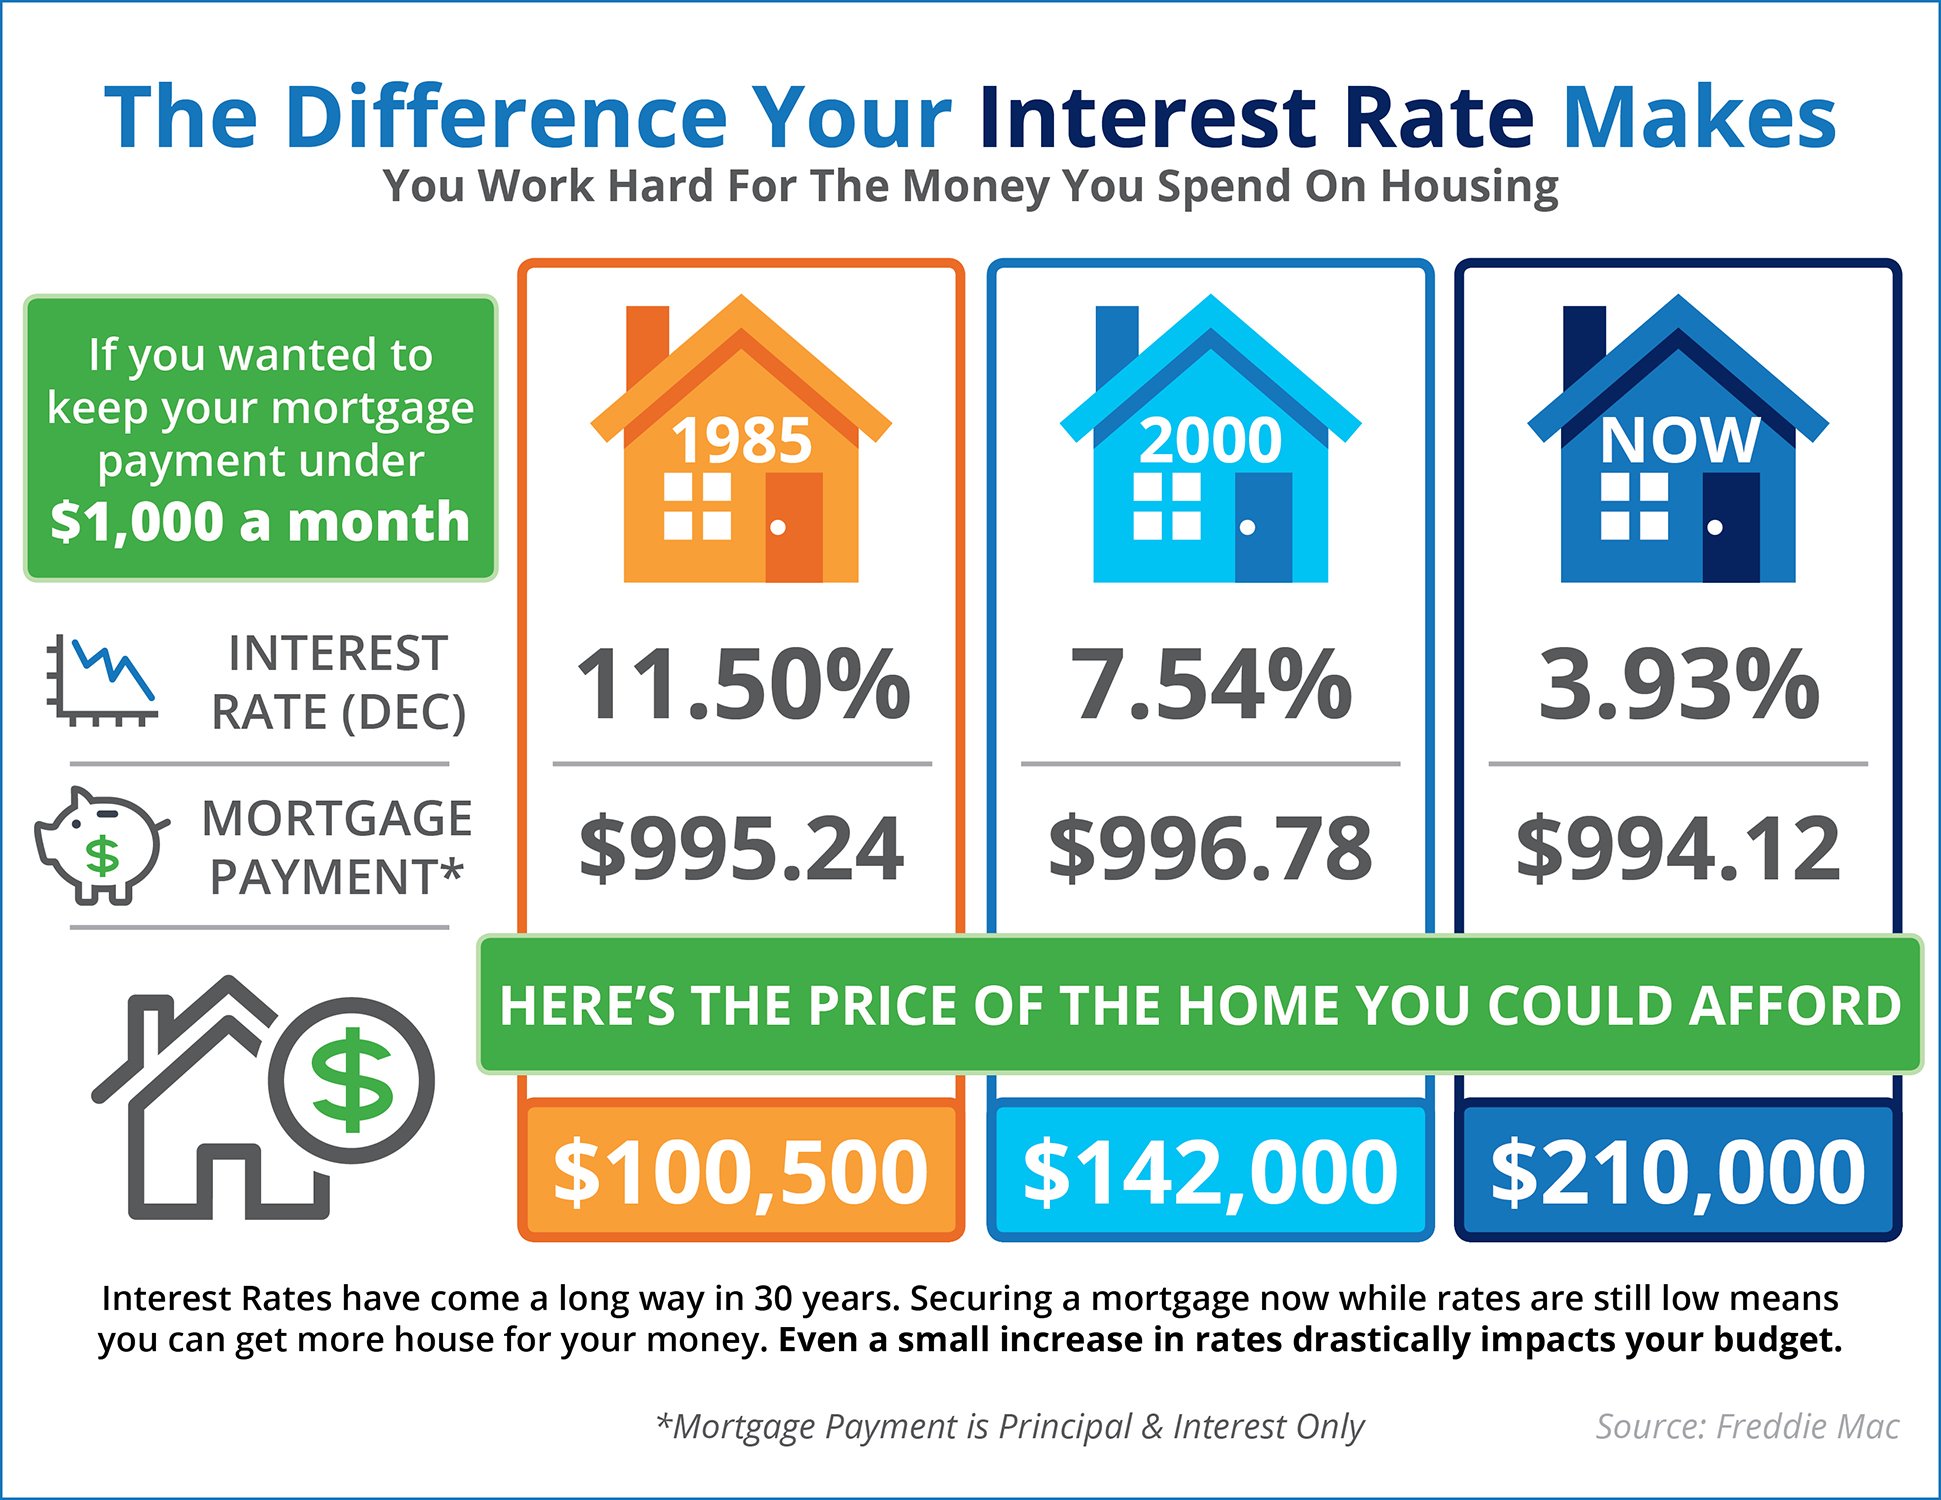 Do You Know The Difference Your Interest Rate Makes? [INFOGRAPHIC] | Simplifying The Market